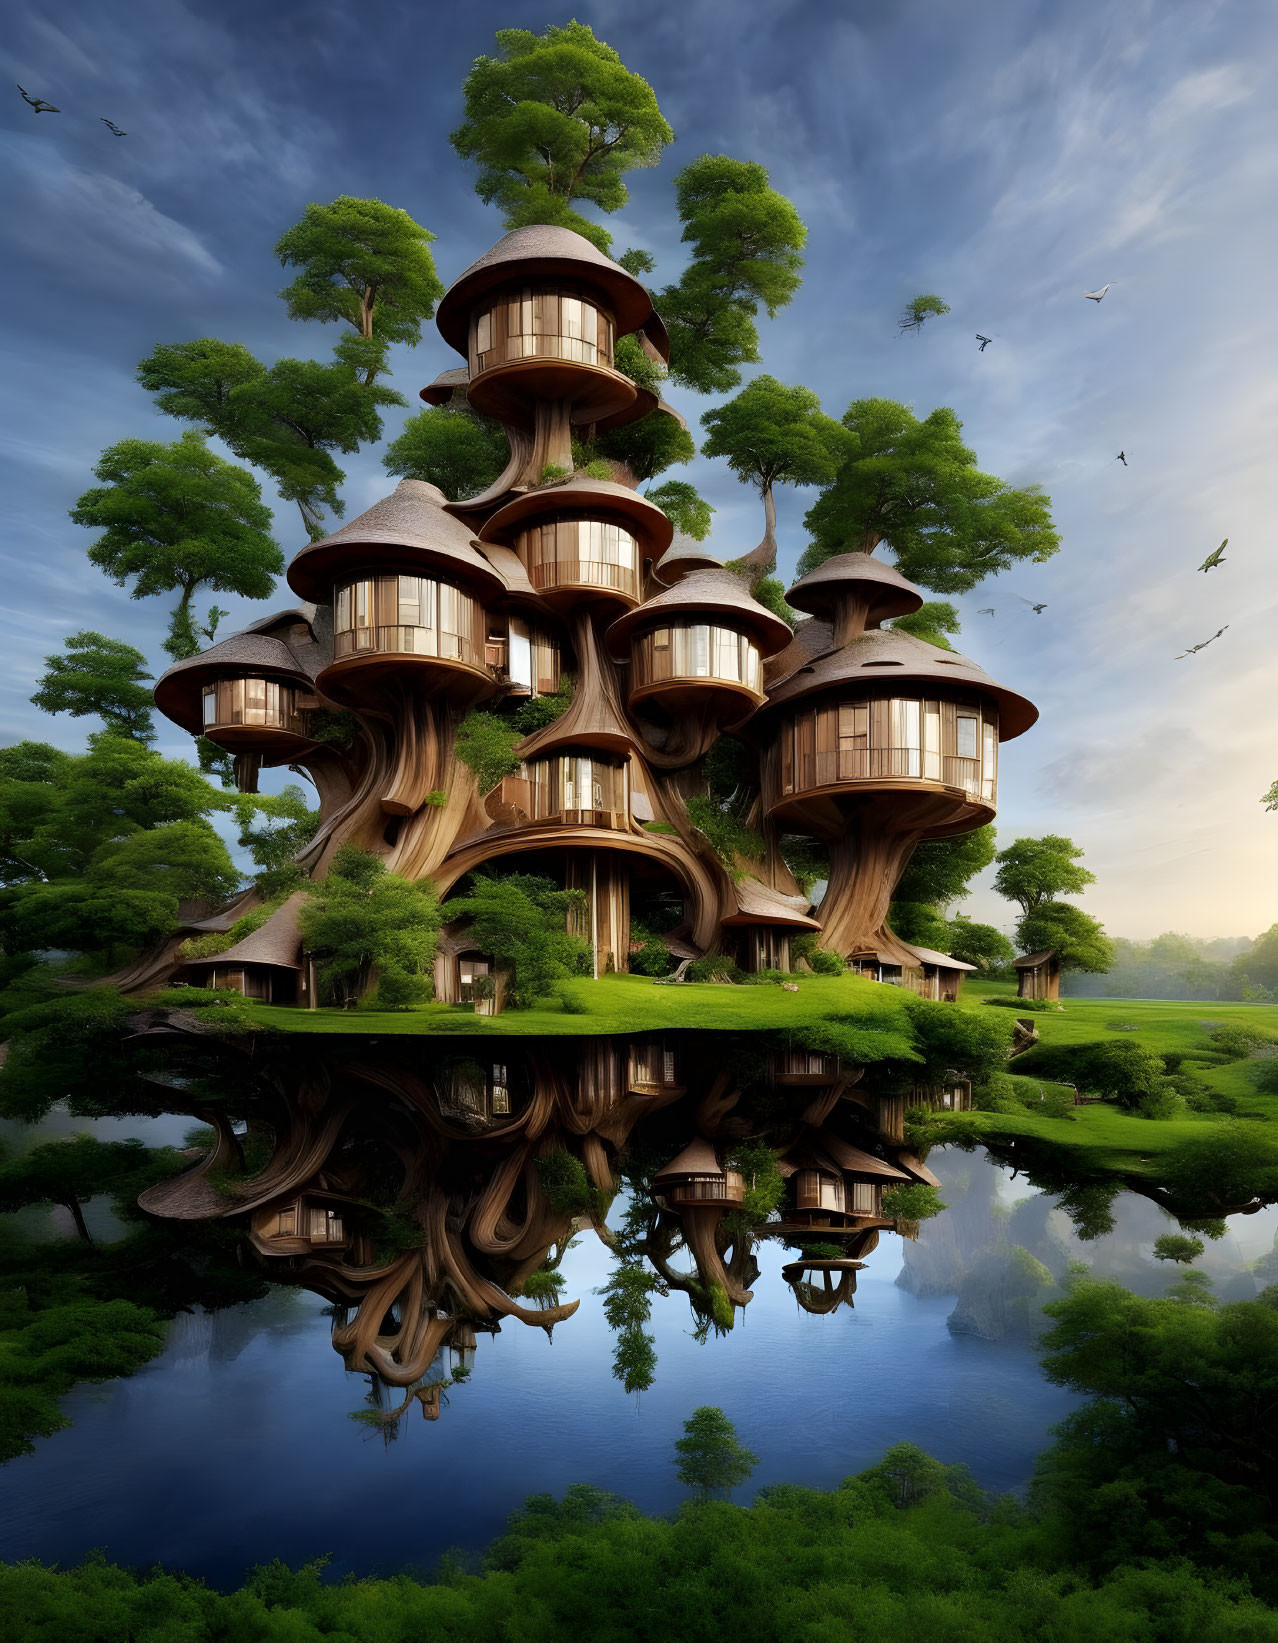 Fantastical multi-level treehouse surrounded by greenery and water reflection